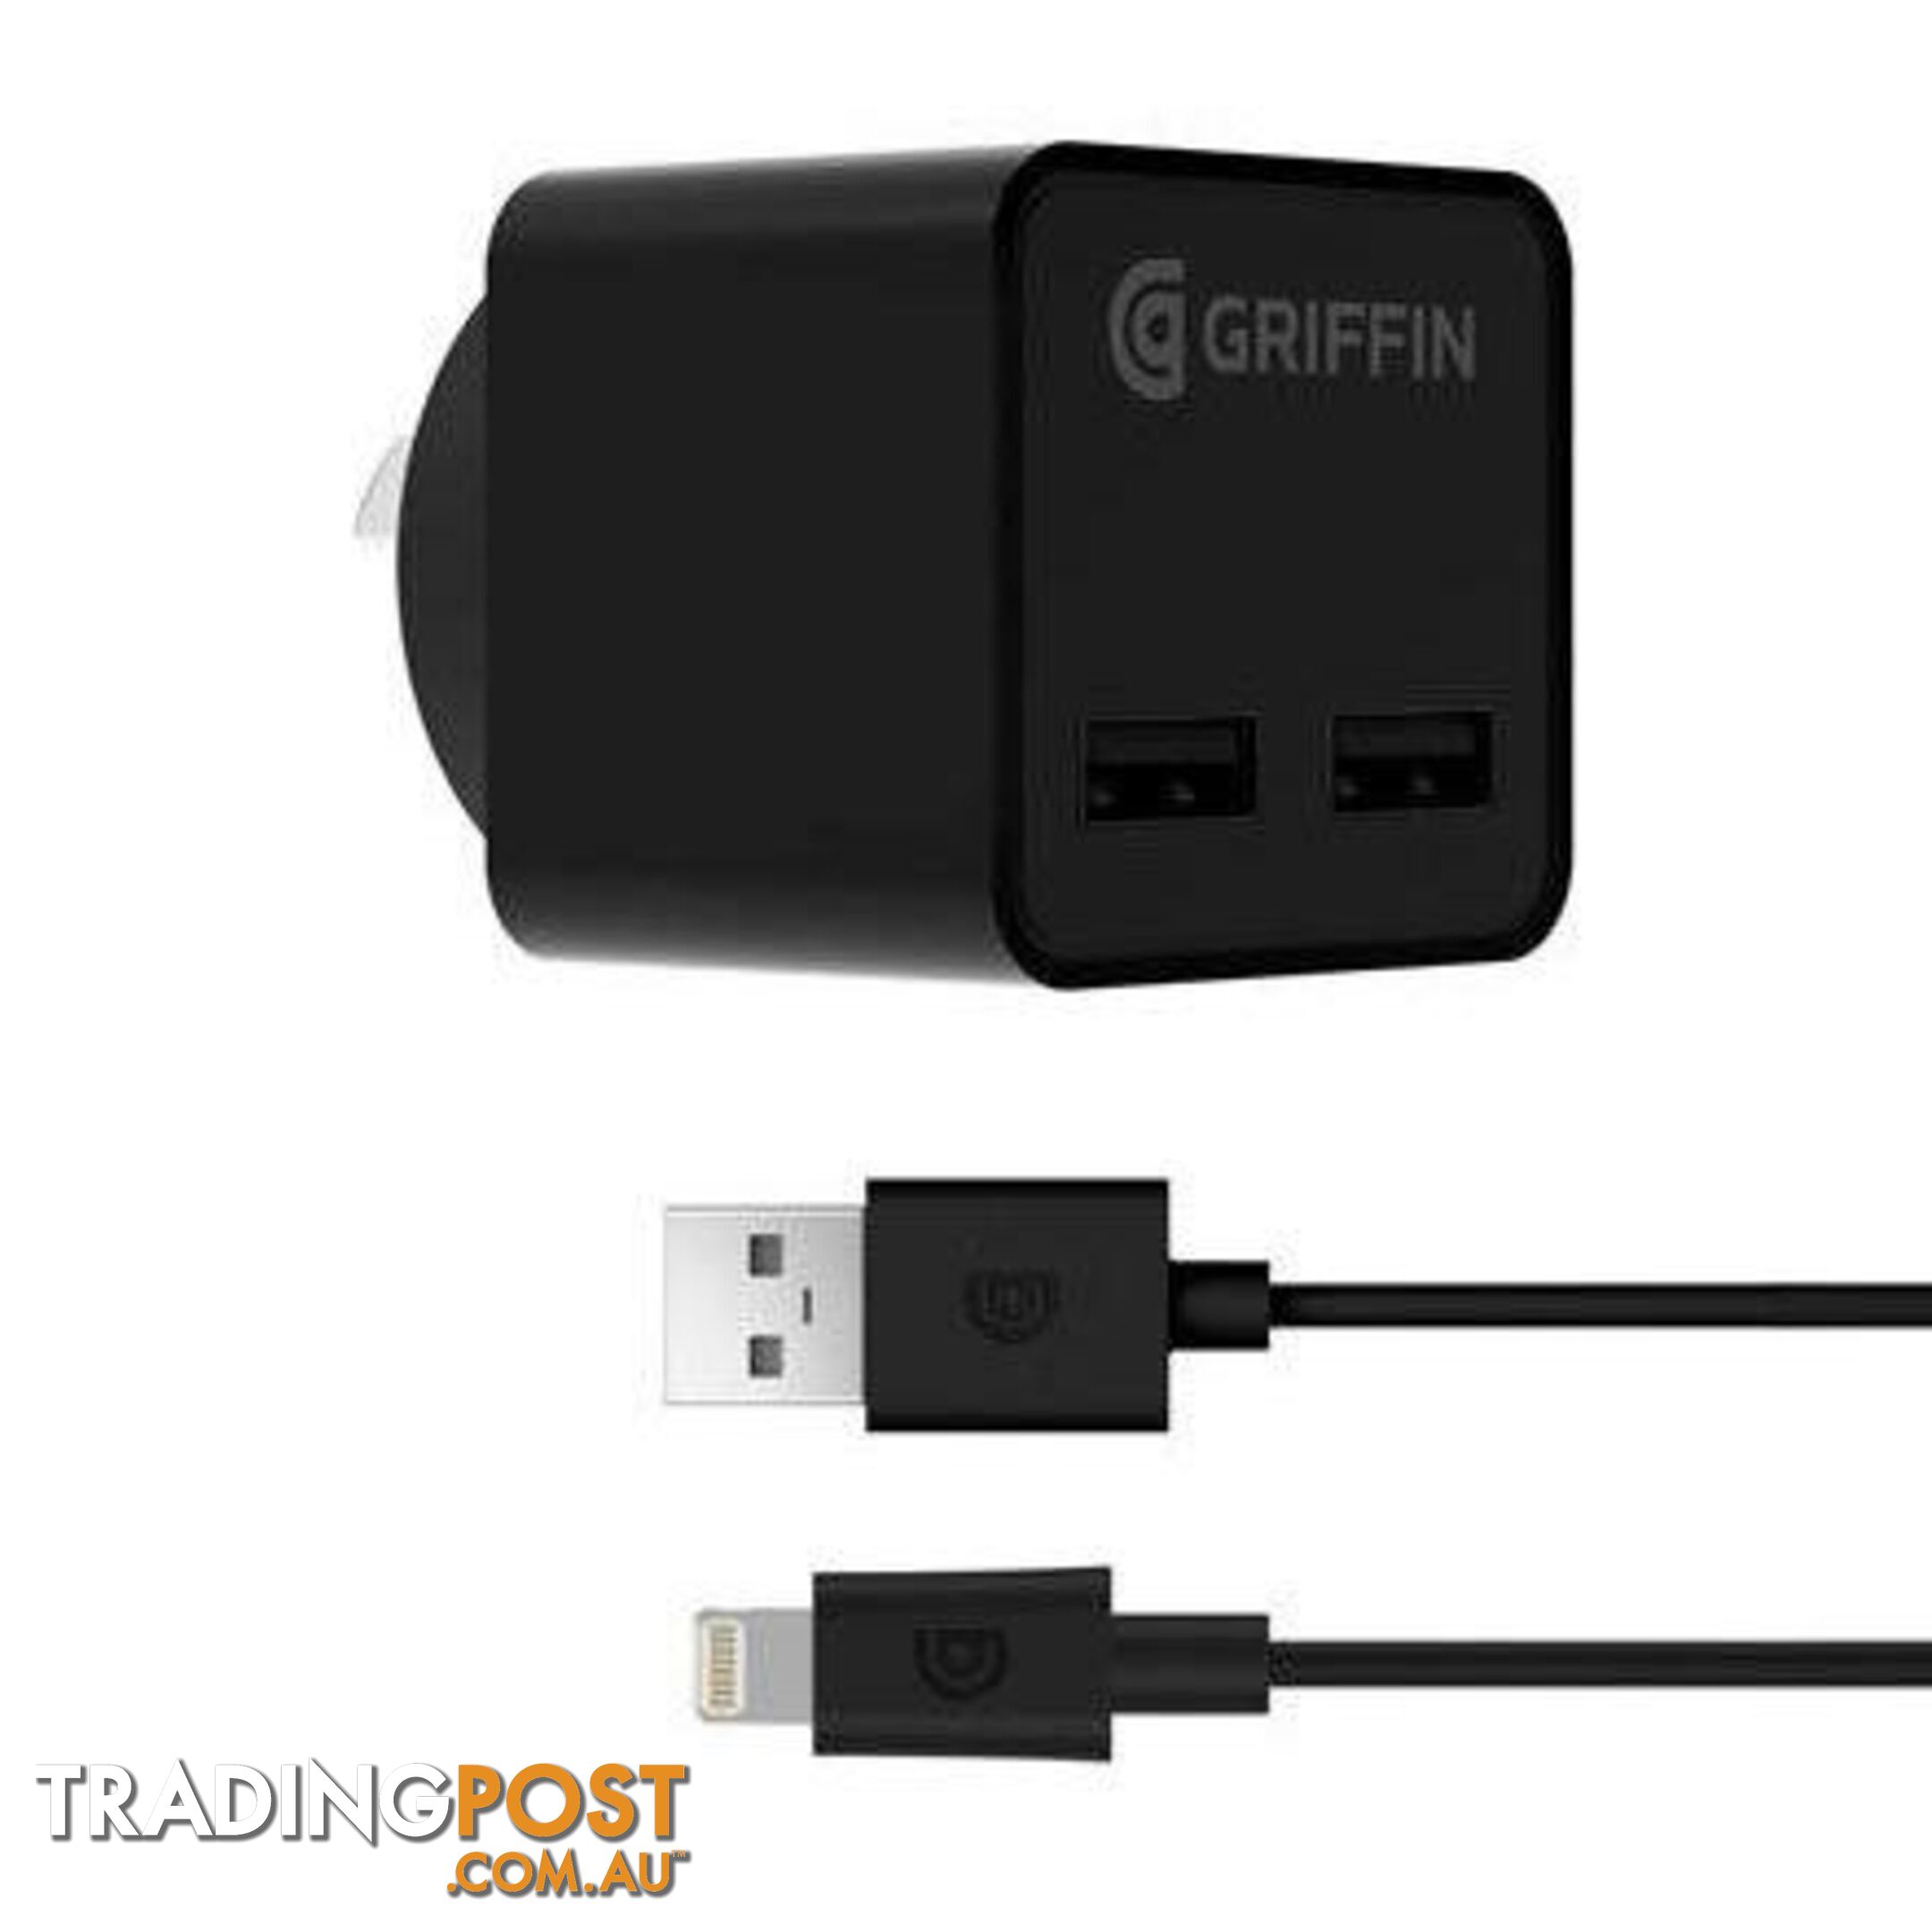 Griffin PowerBlock Dual Port with Lightning cable - Griffin - 191058093226